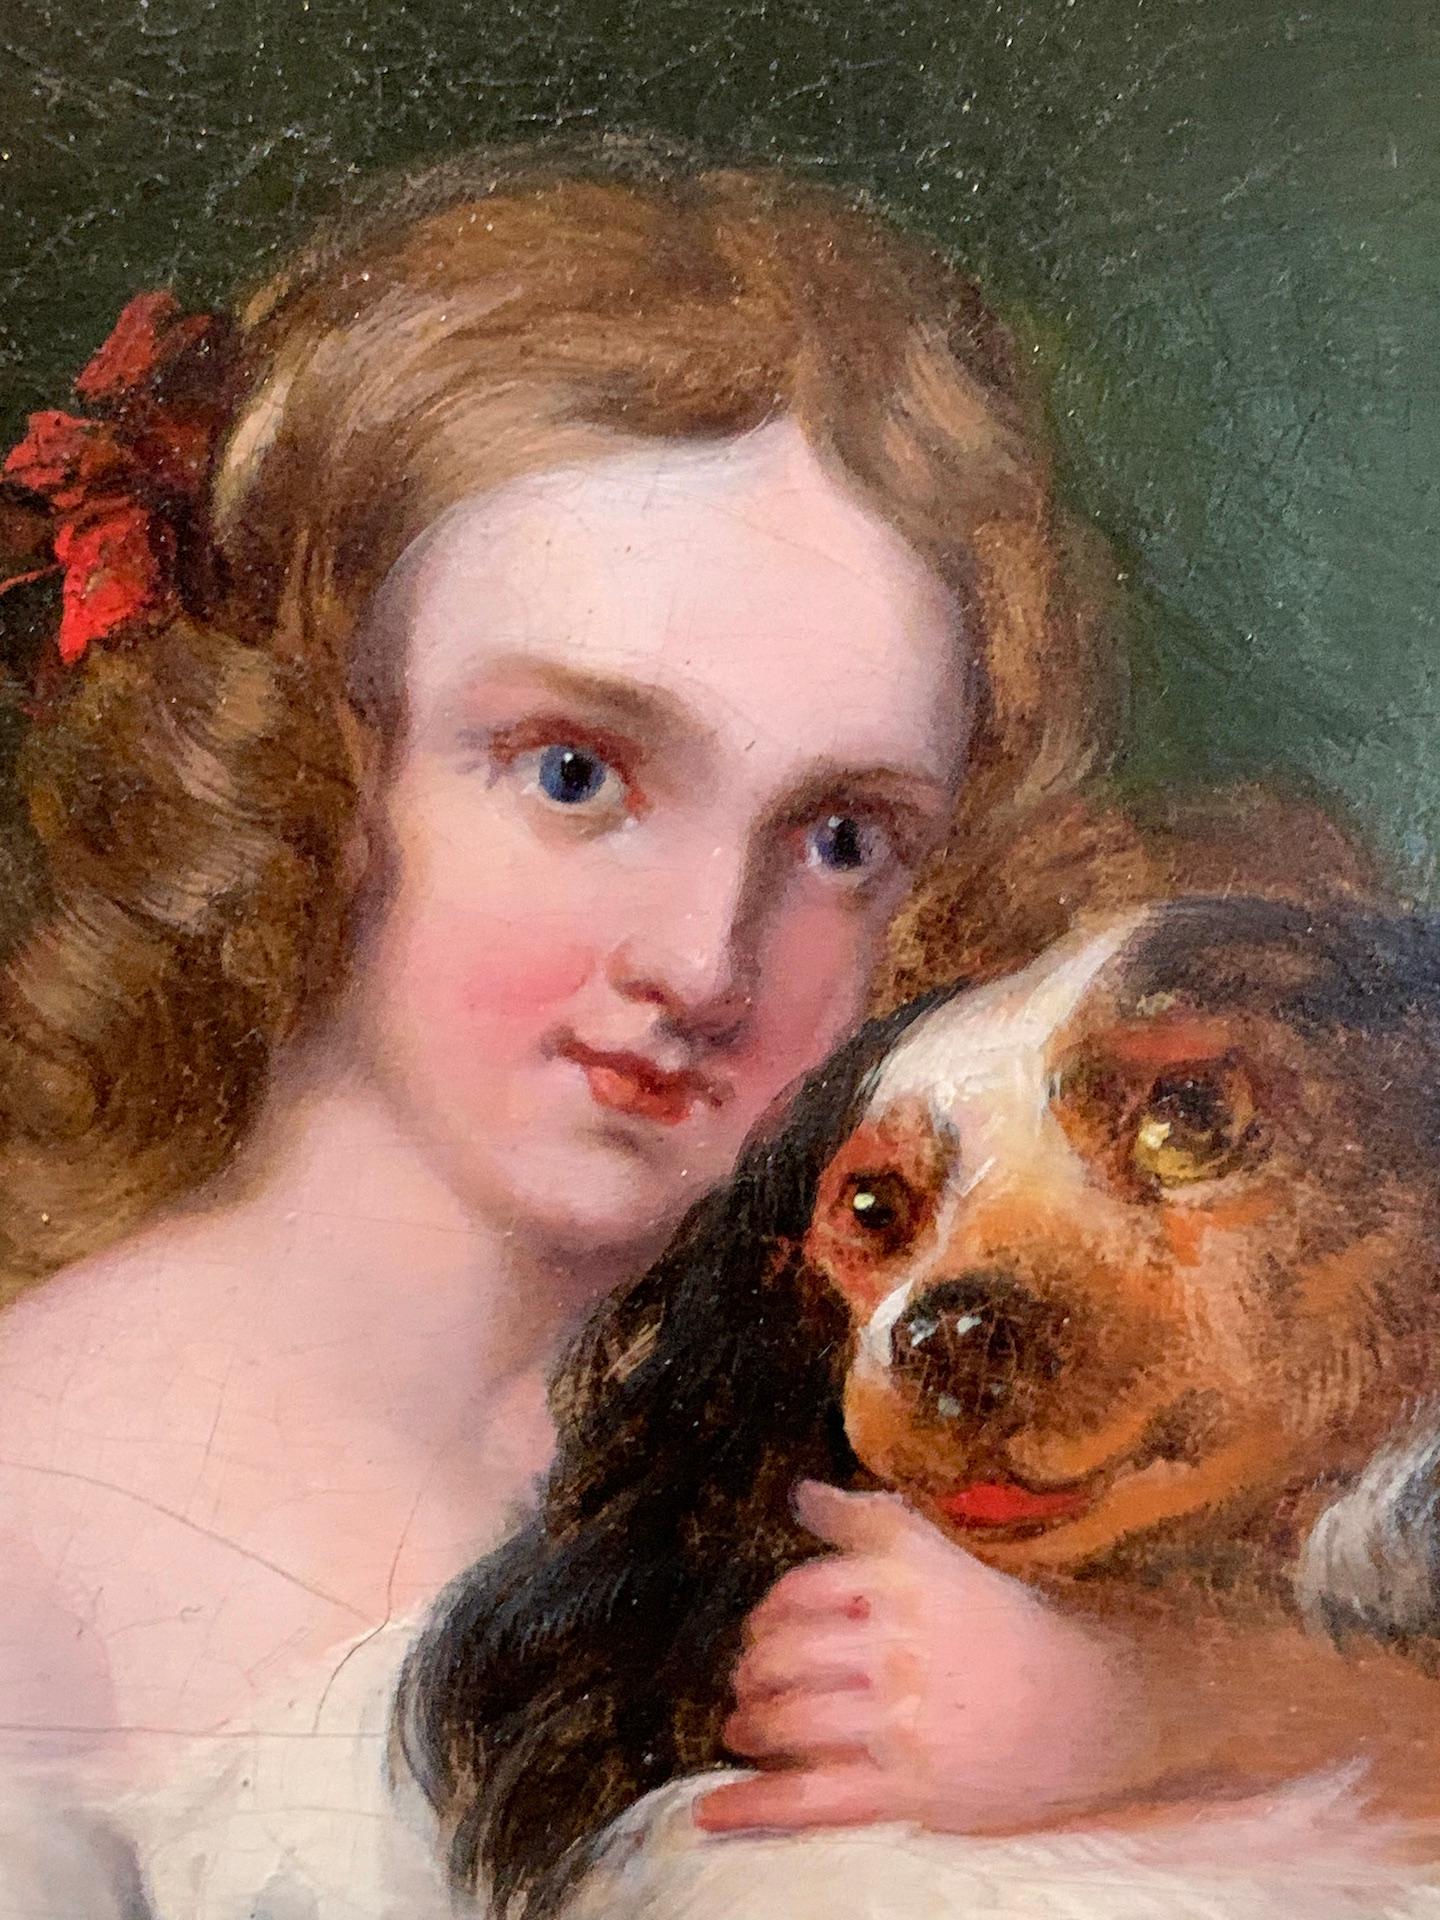 Very pretty19th century portrait of a young girl and her Spaniel. 

The piece is from the middle part of the 19th century when Victorian high-style paintings were at their most sought after.  and this is one such painting

A very well-painted figure